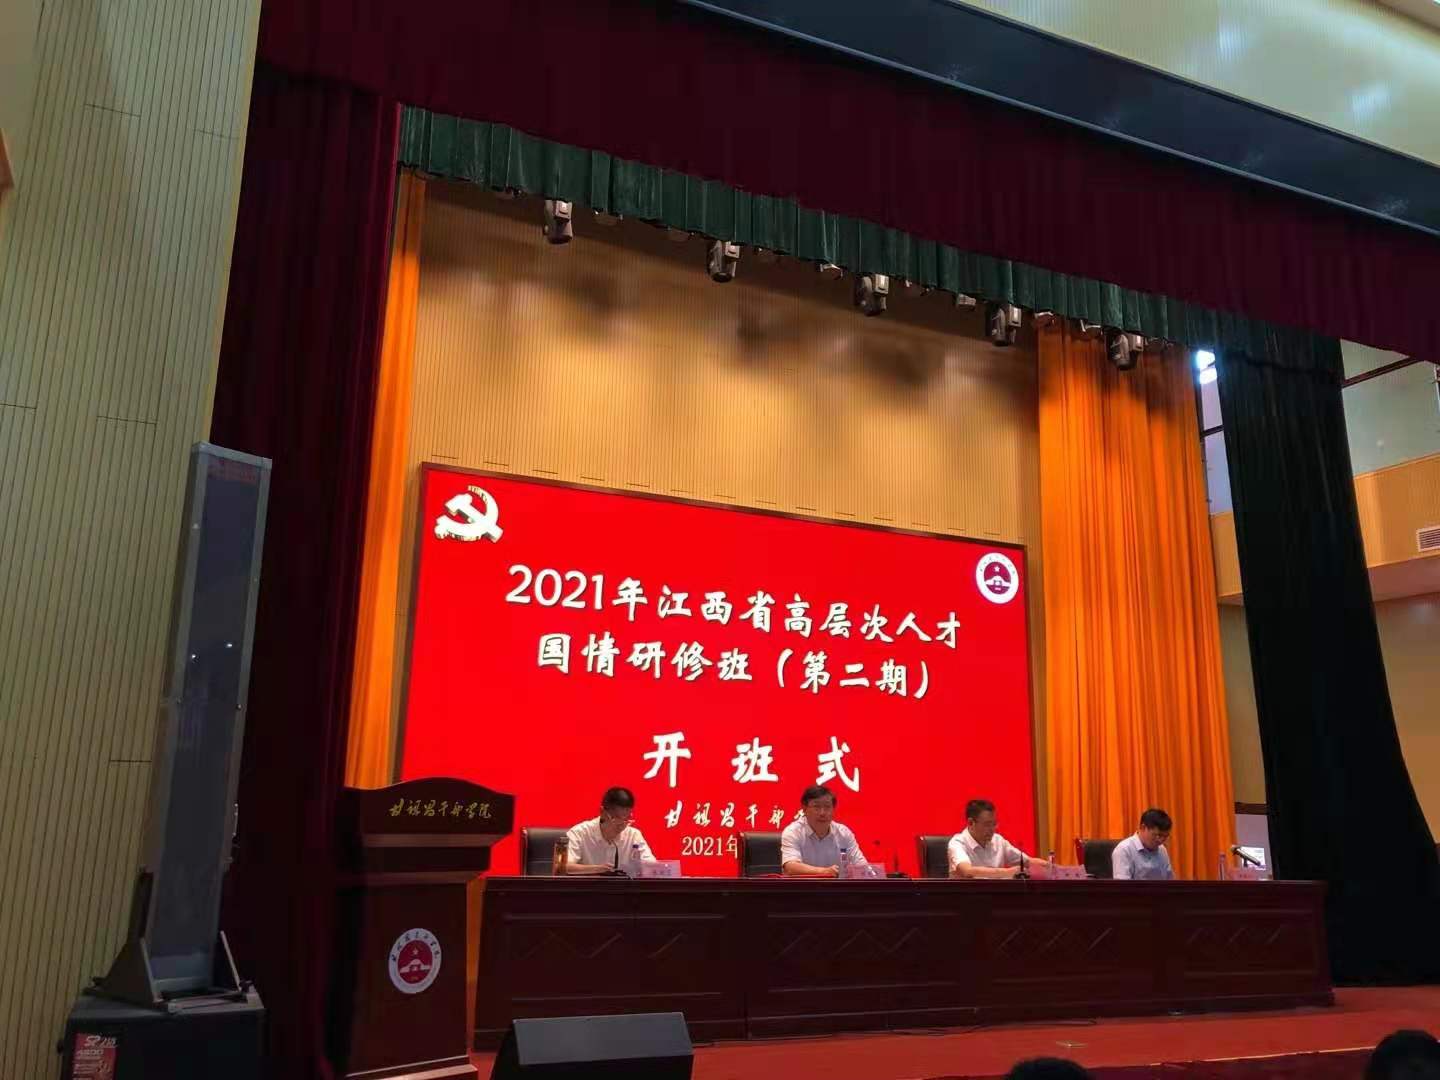 Zhang Aimin, Chairman of Jiangxi Gandian Electric Co., Ltd. participated in the Jiangxi Provincial High-level Talents National Conditions Seminar (Phase 2)